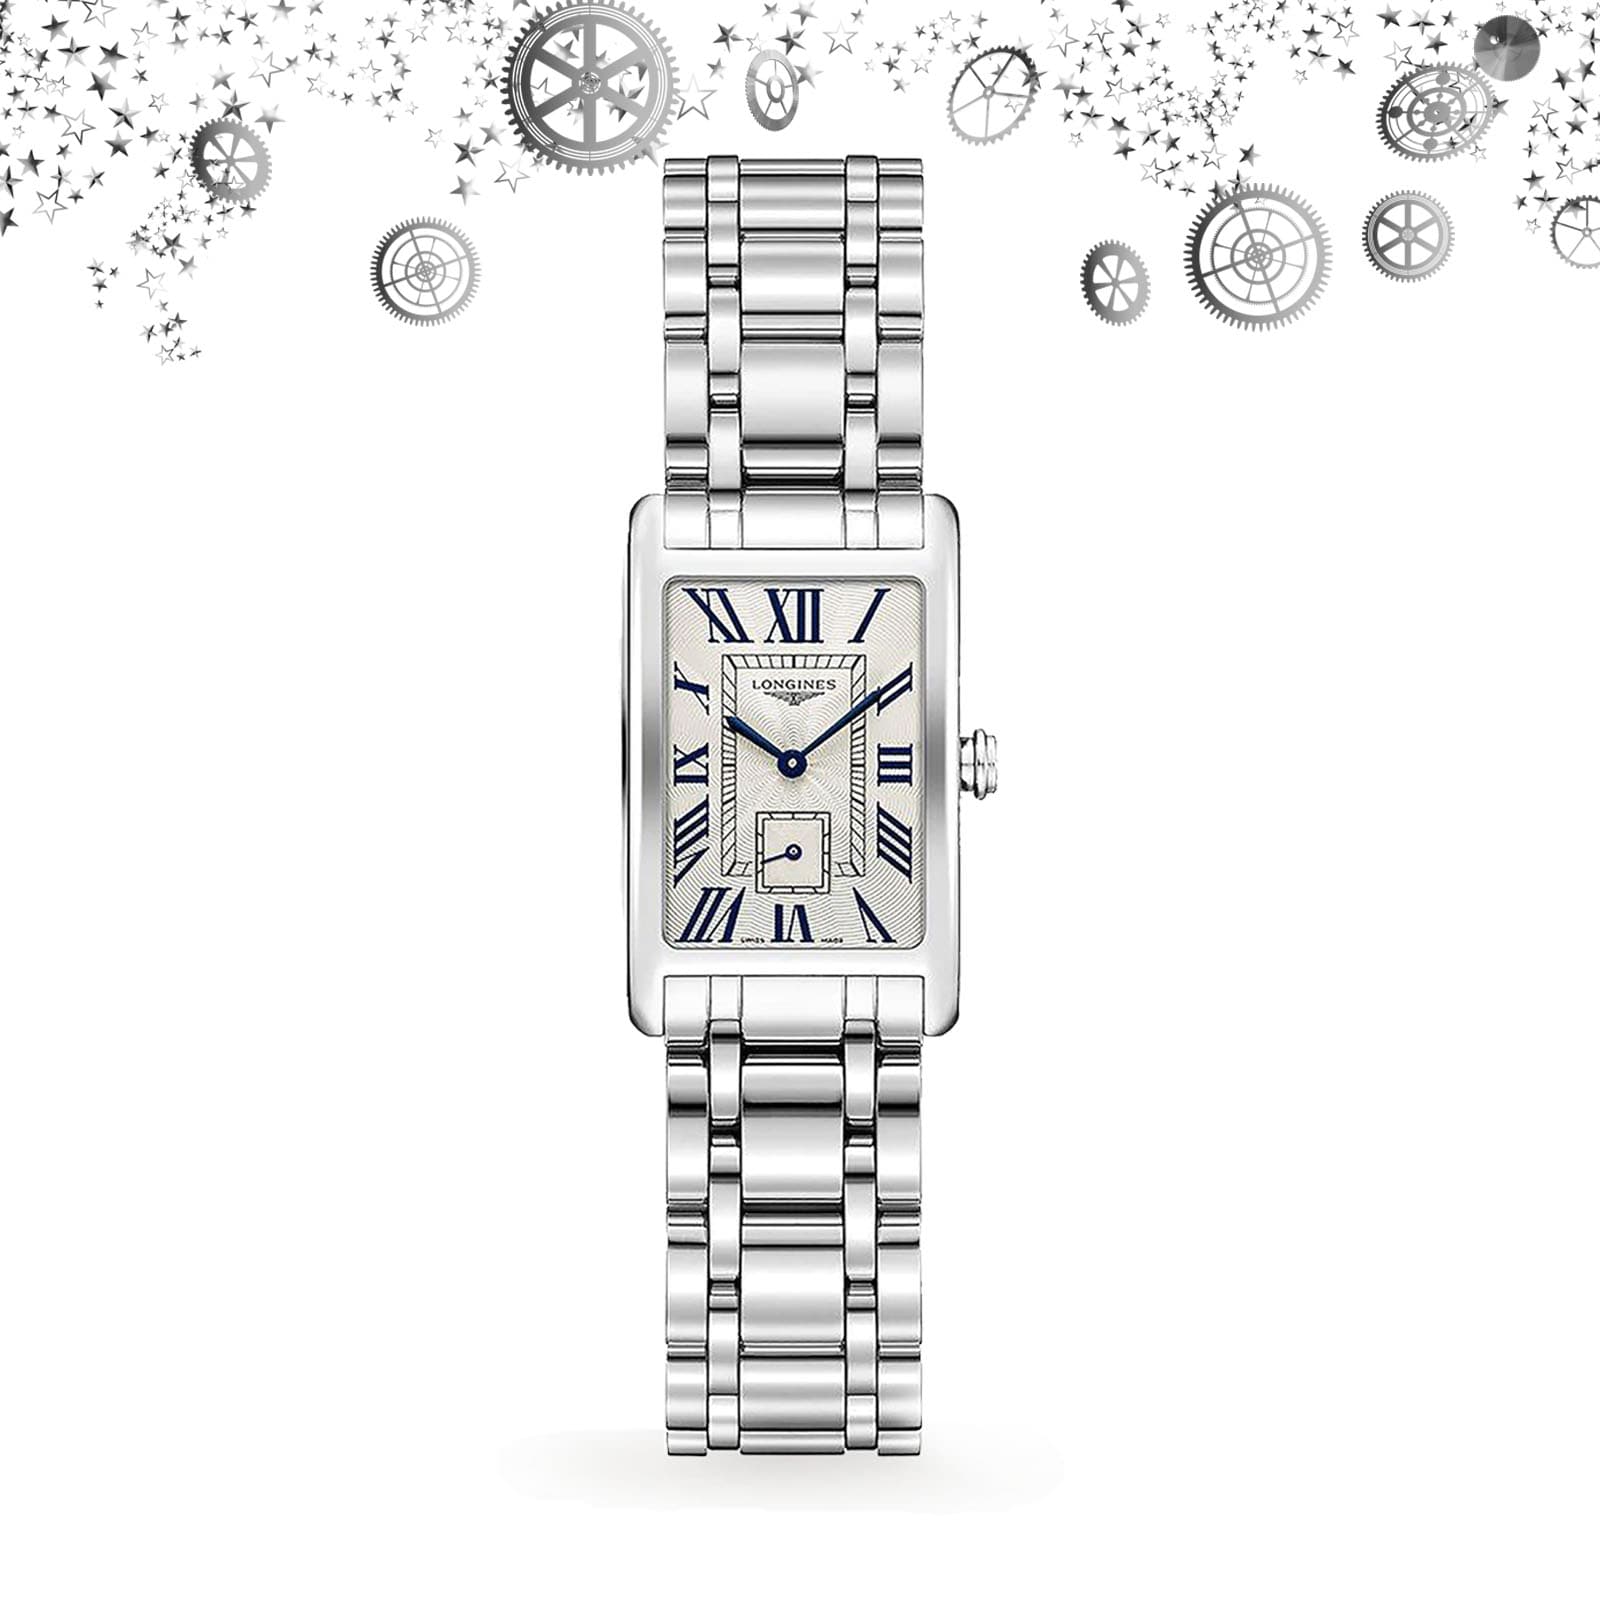 LONGINES DolceVita 20mm Stainless Steel